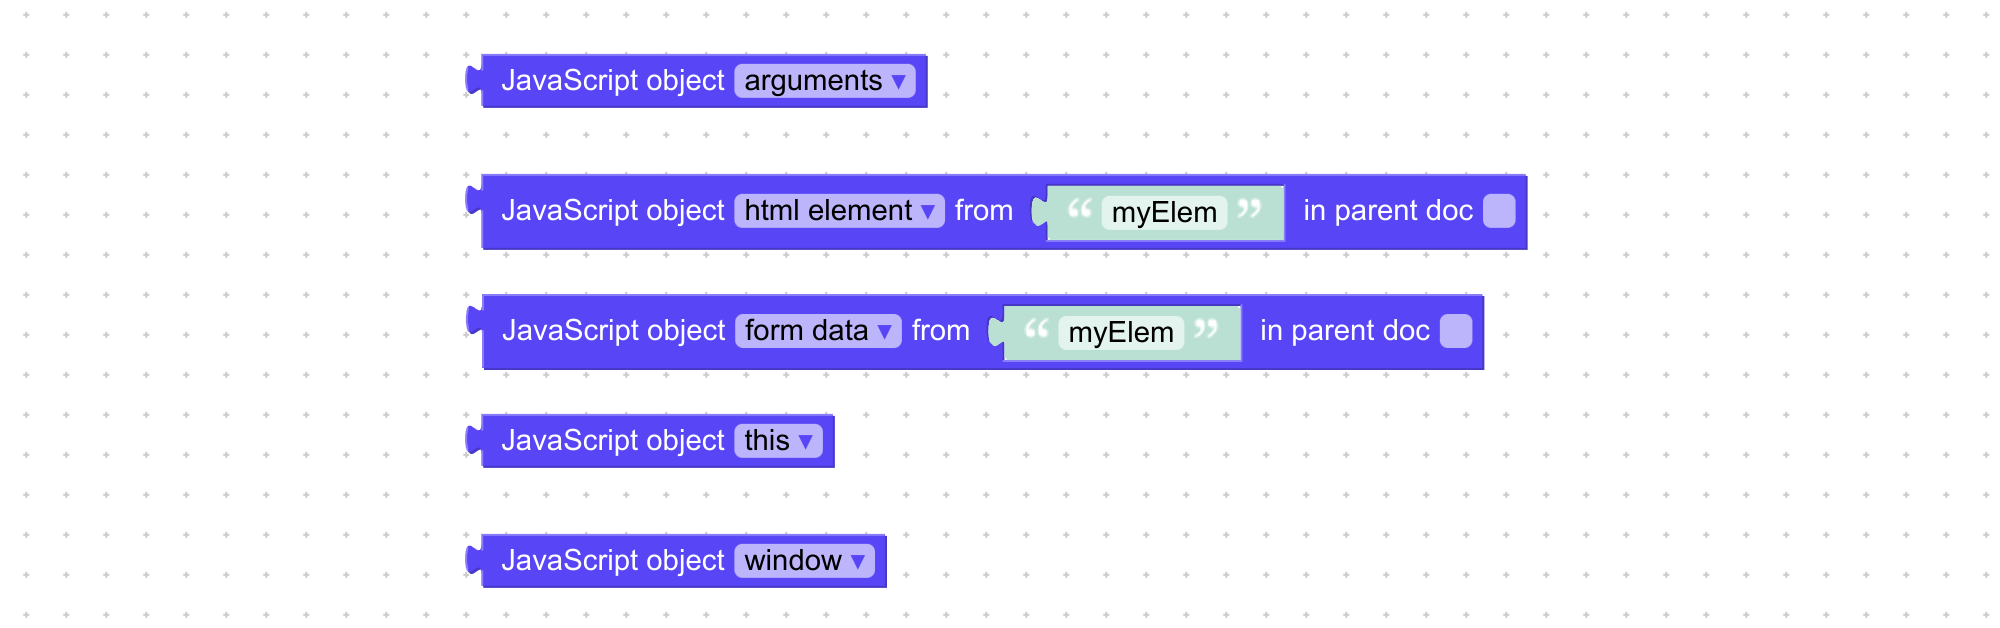 Visual programming block to work with JavaScript objects